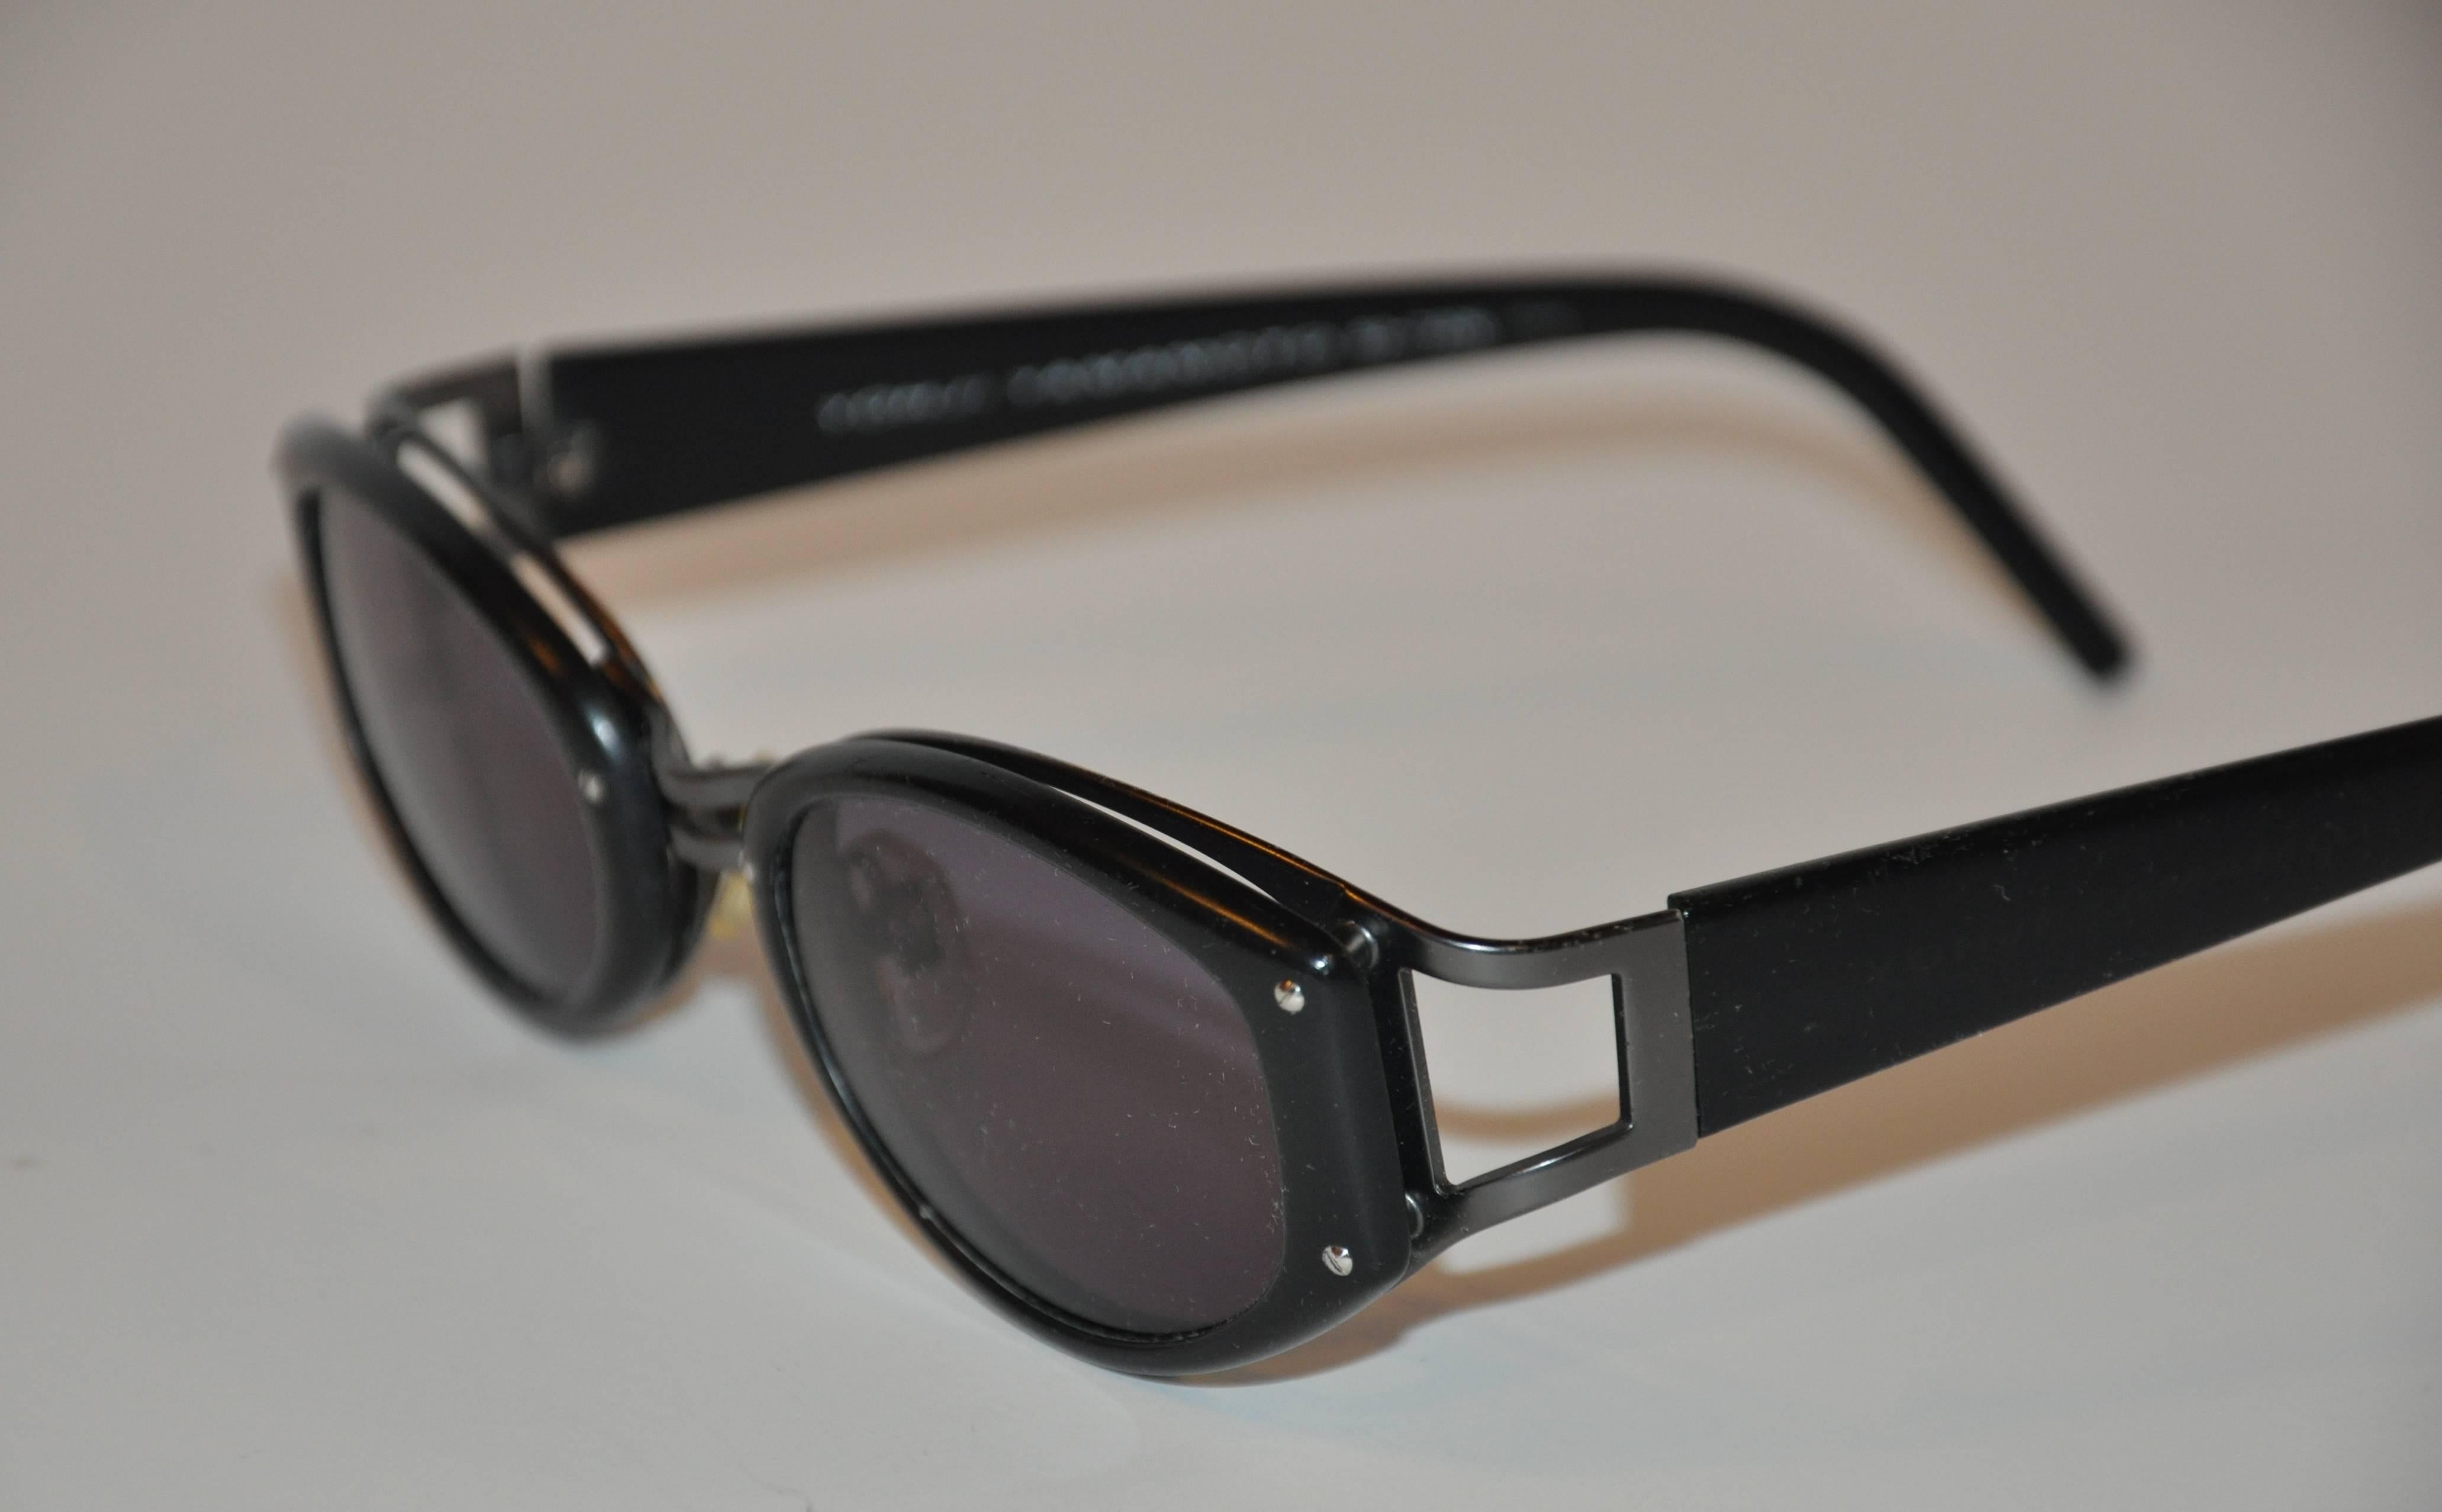 Yohji Yamamoto Wonderfully detailed double-frame sunglasses consists of one in matte black lucite and steel-gray hardware combined into one. Frames are accented with studs. The arms has the signature name on both sides. The front measures 5 1/2